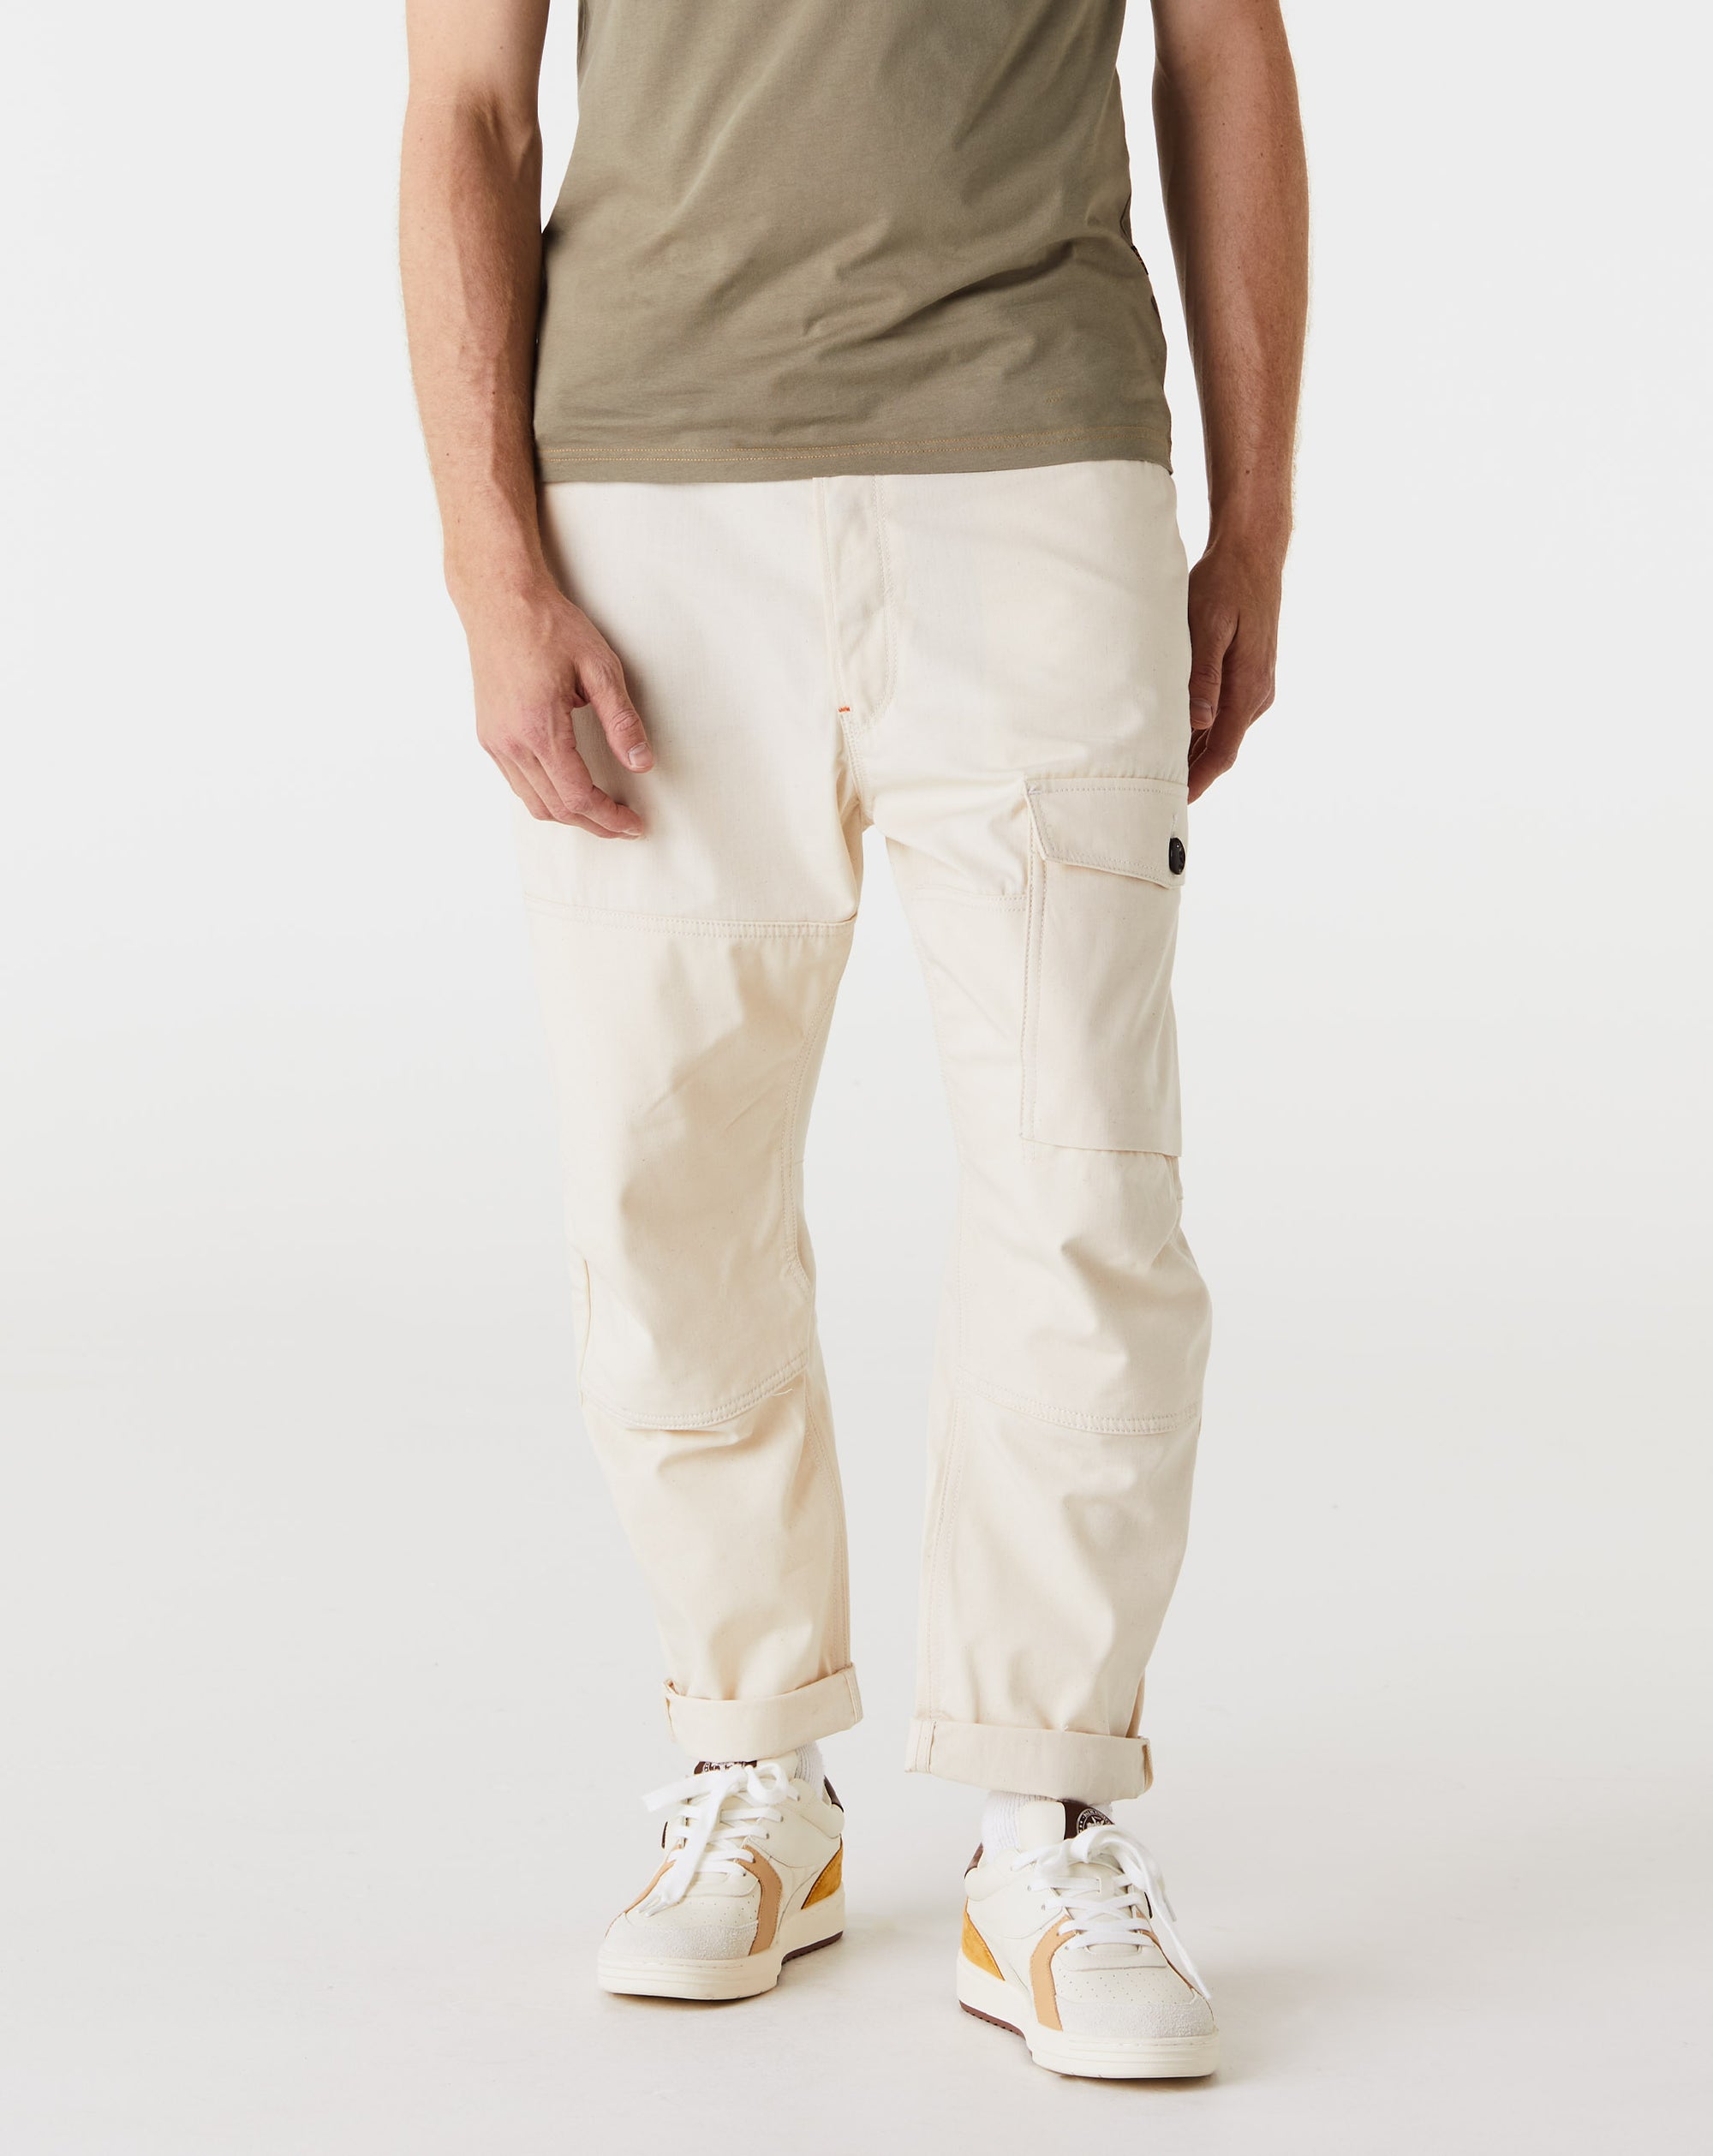 G-Star RAW Bearing 3D Cargo Pants - Rule of Next Apparel